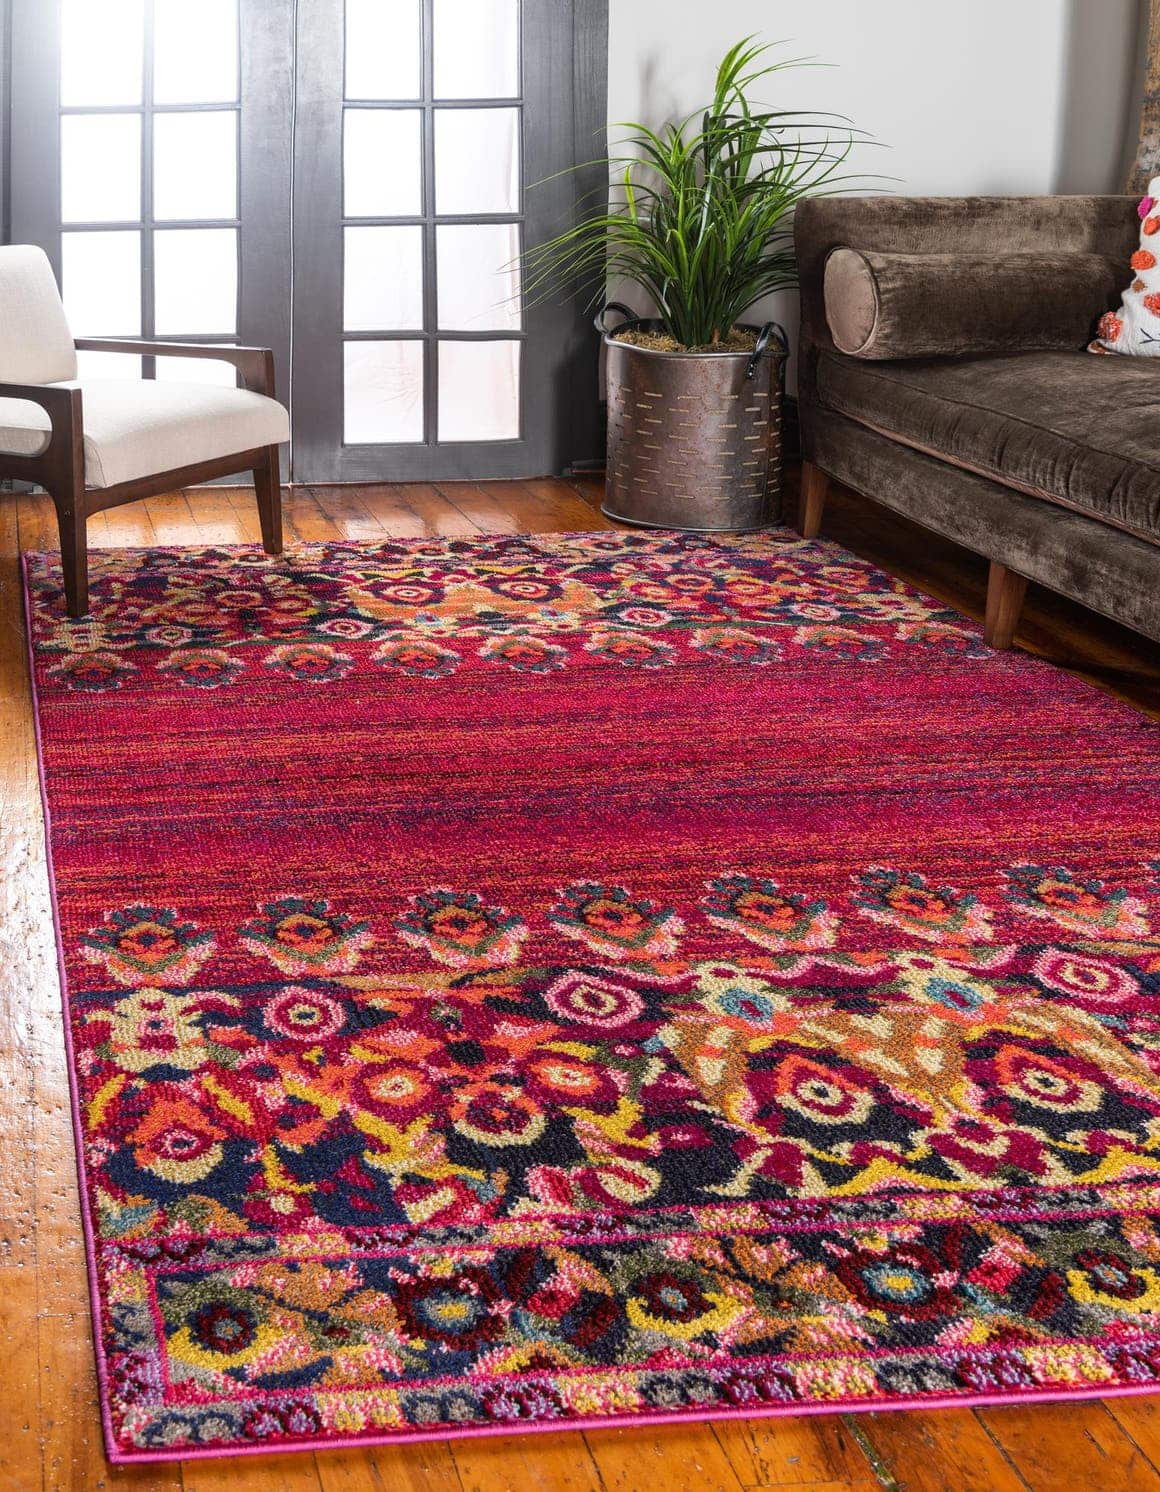 25 Gorgeous Rugs That Go With Brown Couches, Brown And Red Rug